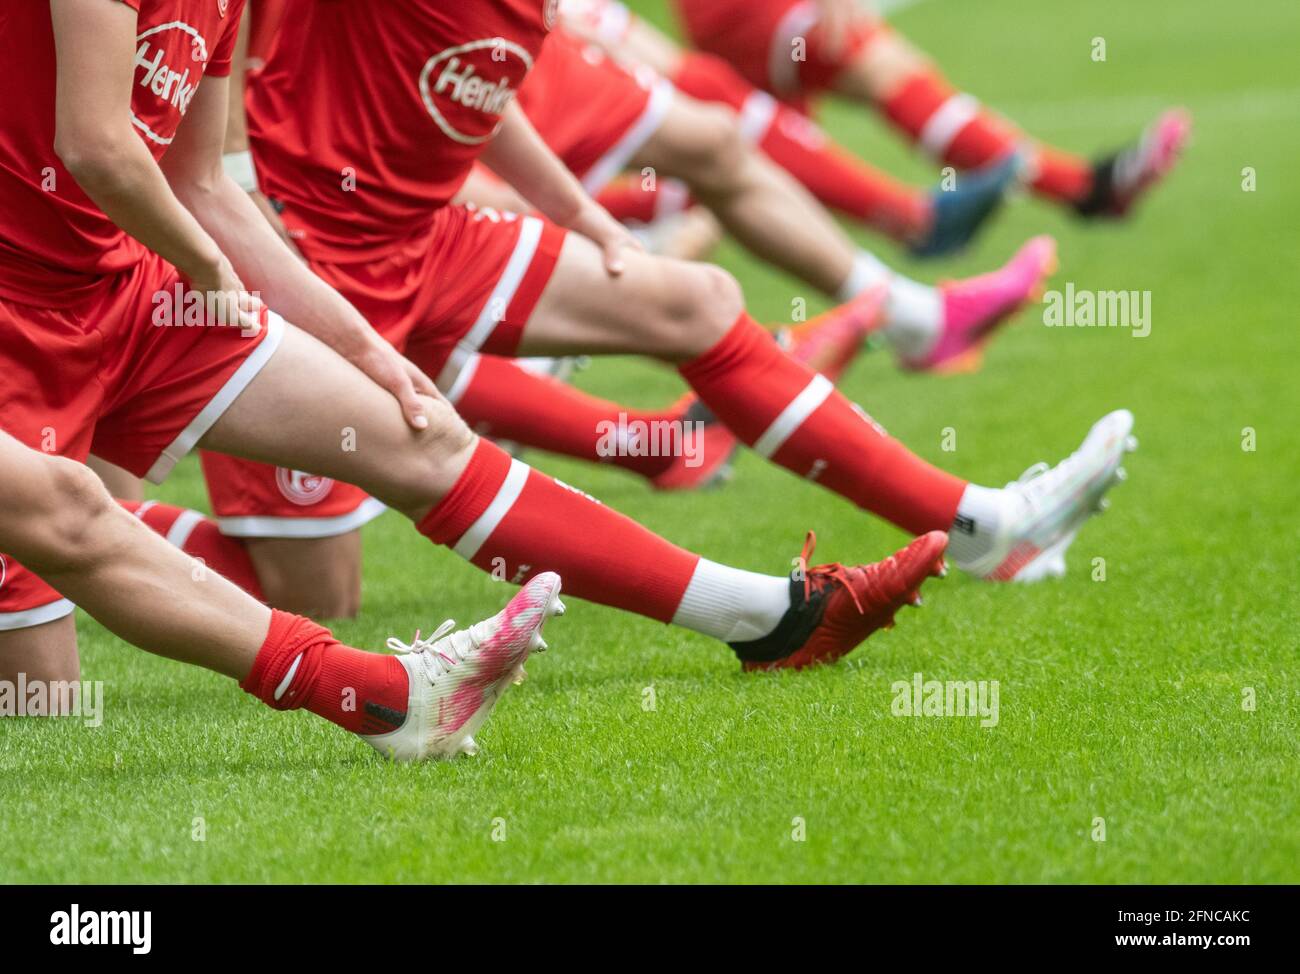 Duesseldorf, Germany. 16th May, 2021. Soccer: 2. Bundesliga, Fortuna Düsseldorf - Erzgebirge Aue, 33. matchday at Merkus Spiel-Arena: Fortuna's players stretch before the match. Credit: Bernd Thissen/dpa - IMPORTANT NOTE: In accordance with the regulations of the DFL Deutsche Fußball Liga and/or the DFB Deutscher Fußball-Bund, it is prohibited to use or have used photographs taken in the stadium and/or of the match in the form of sequence pictures and/or video-like photo series./dpa/Alamy Live News Stock Photo